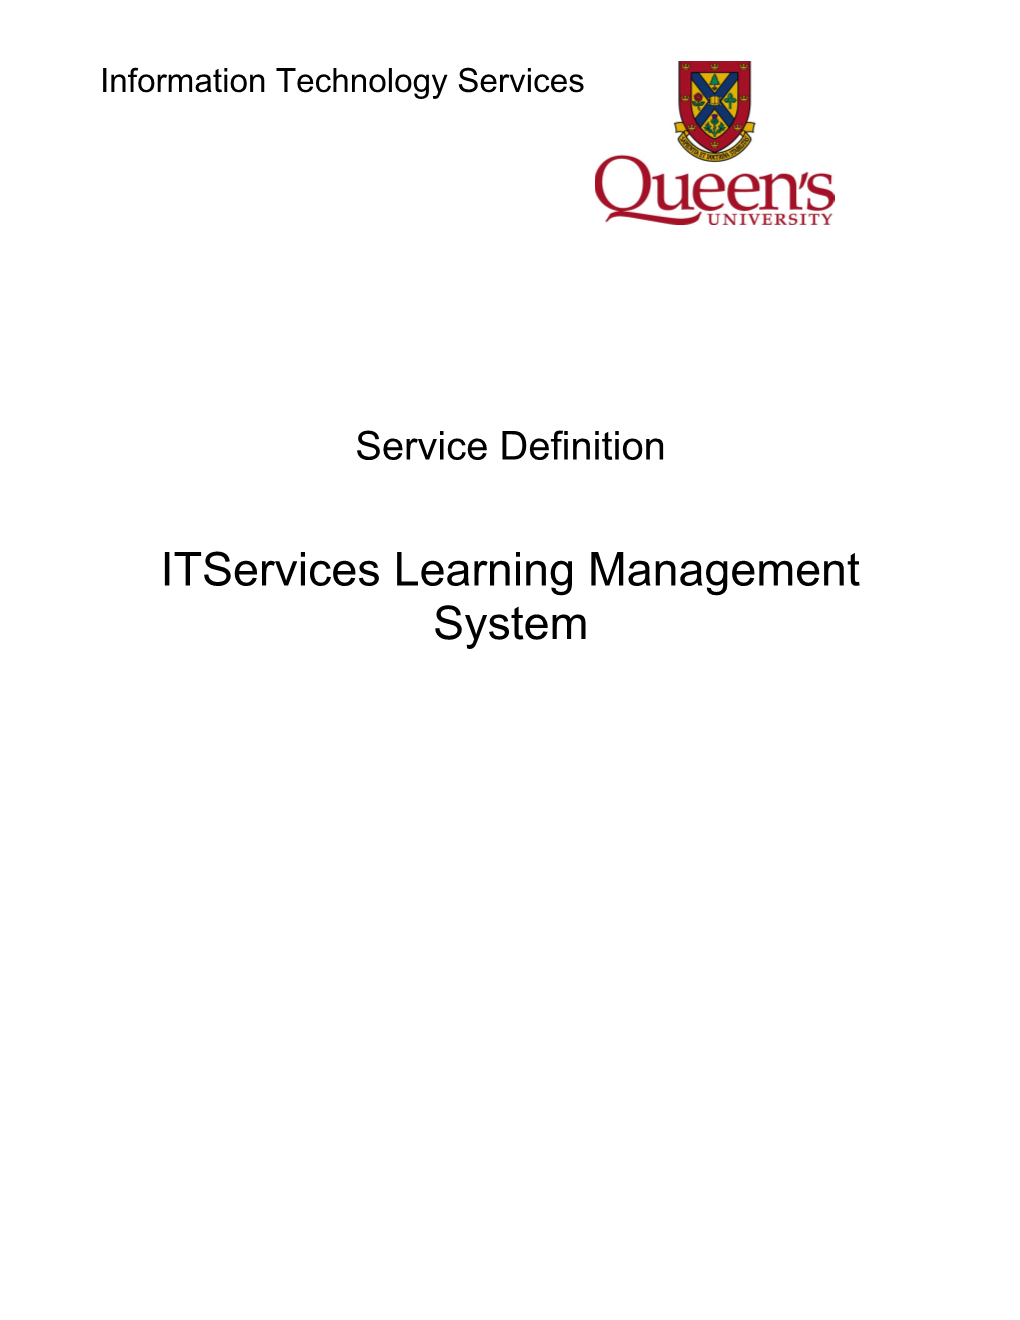 Itservices Learning Management System